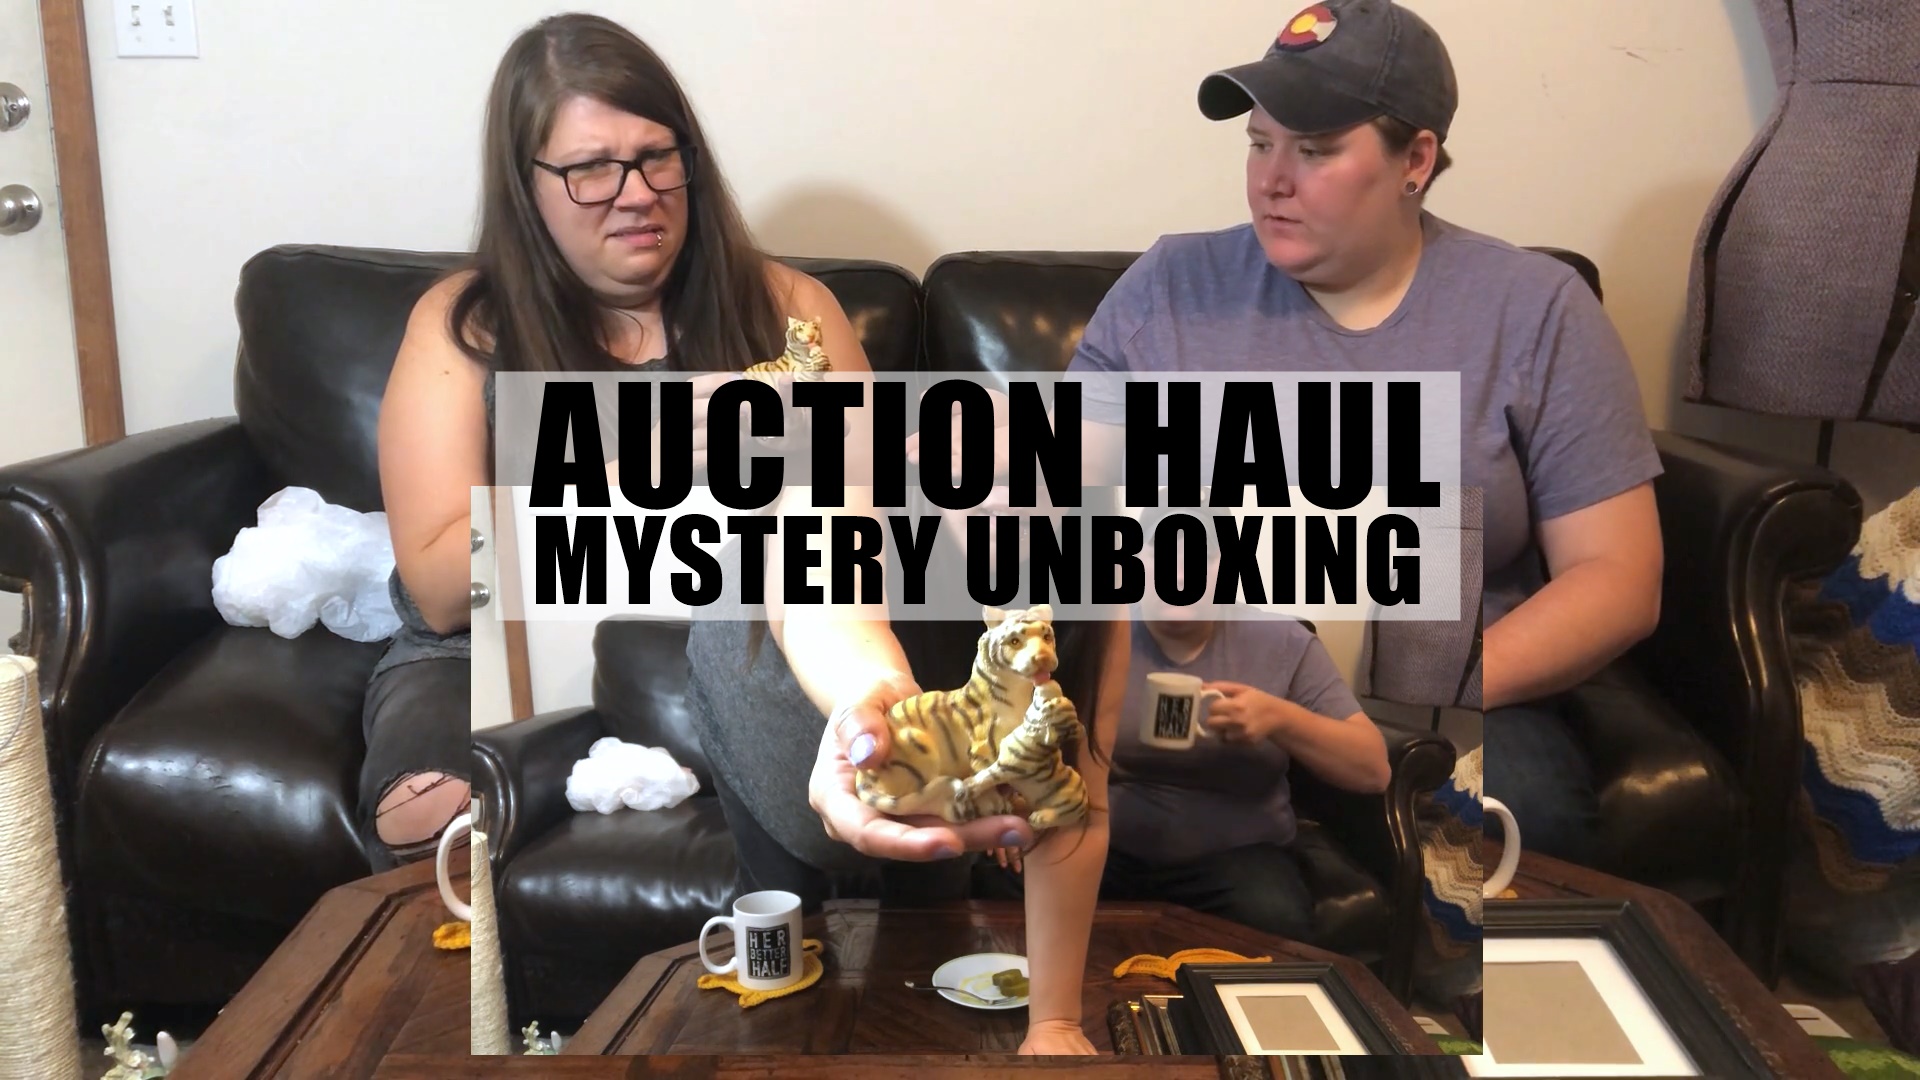 Auction Haul & Mystery Unboxing Video